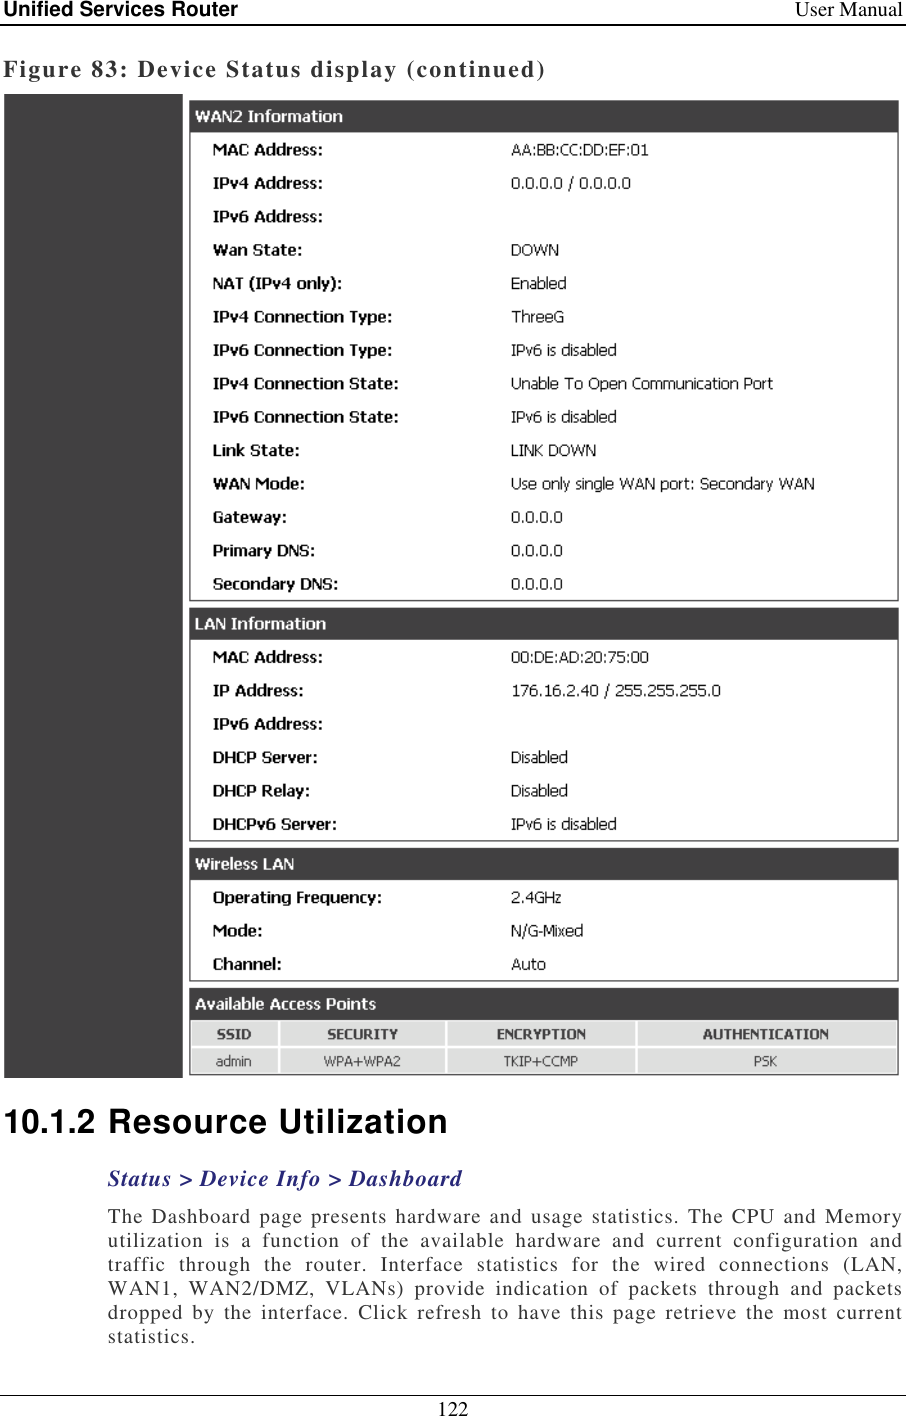 Unified Services Router    User Manual 122  Figure 83: Device Status display (continued)  10.1.2 Resource Utilization Status &gt; Device Info &gt; Dashboard The  Dashboard page presents hardware  and usage statistics.  The CPU and Memory utilization  is  a  function  of  the  available  hardware  and  current  configuration  and traffic  through  the  router.  Interface  statistics  for  the  wired  connections  (LAN, WAN1,  WAN2/DMZ,  VLANs)  provide  indication  of  packets  through  and  packets dropped  by  the  interface.  Click  refresh  to  have  this  page  retrieve  the  most  current statistics.  